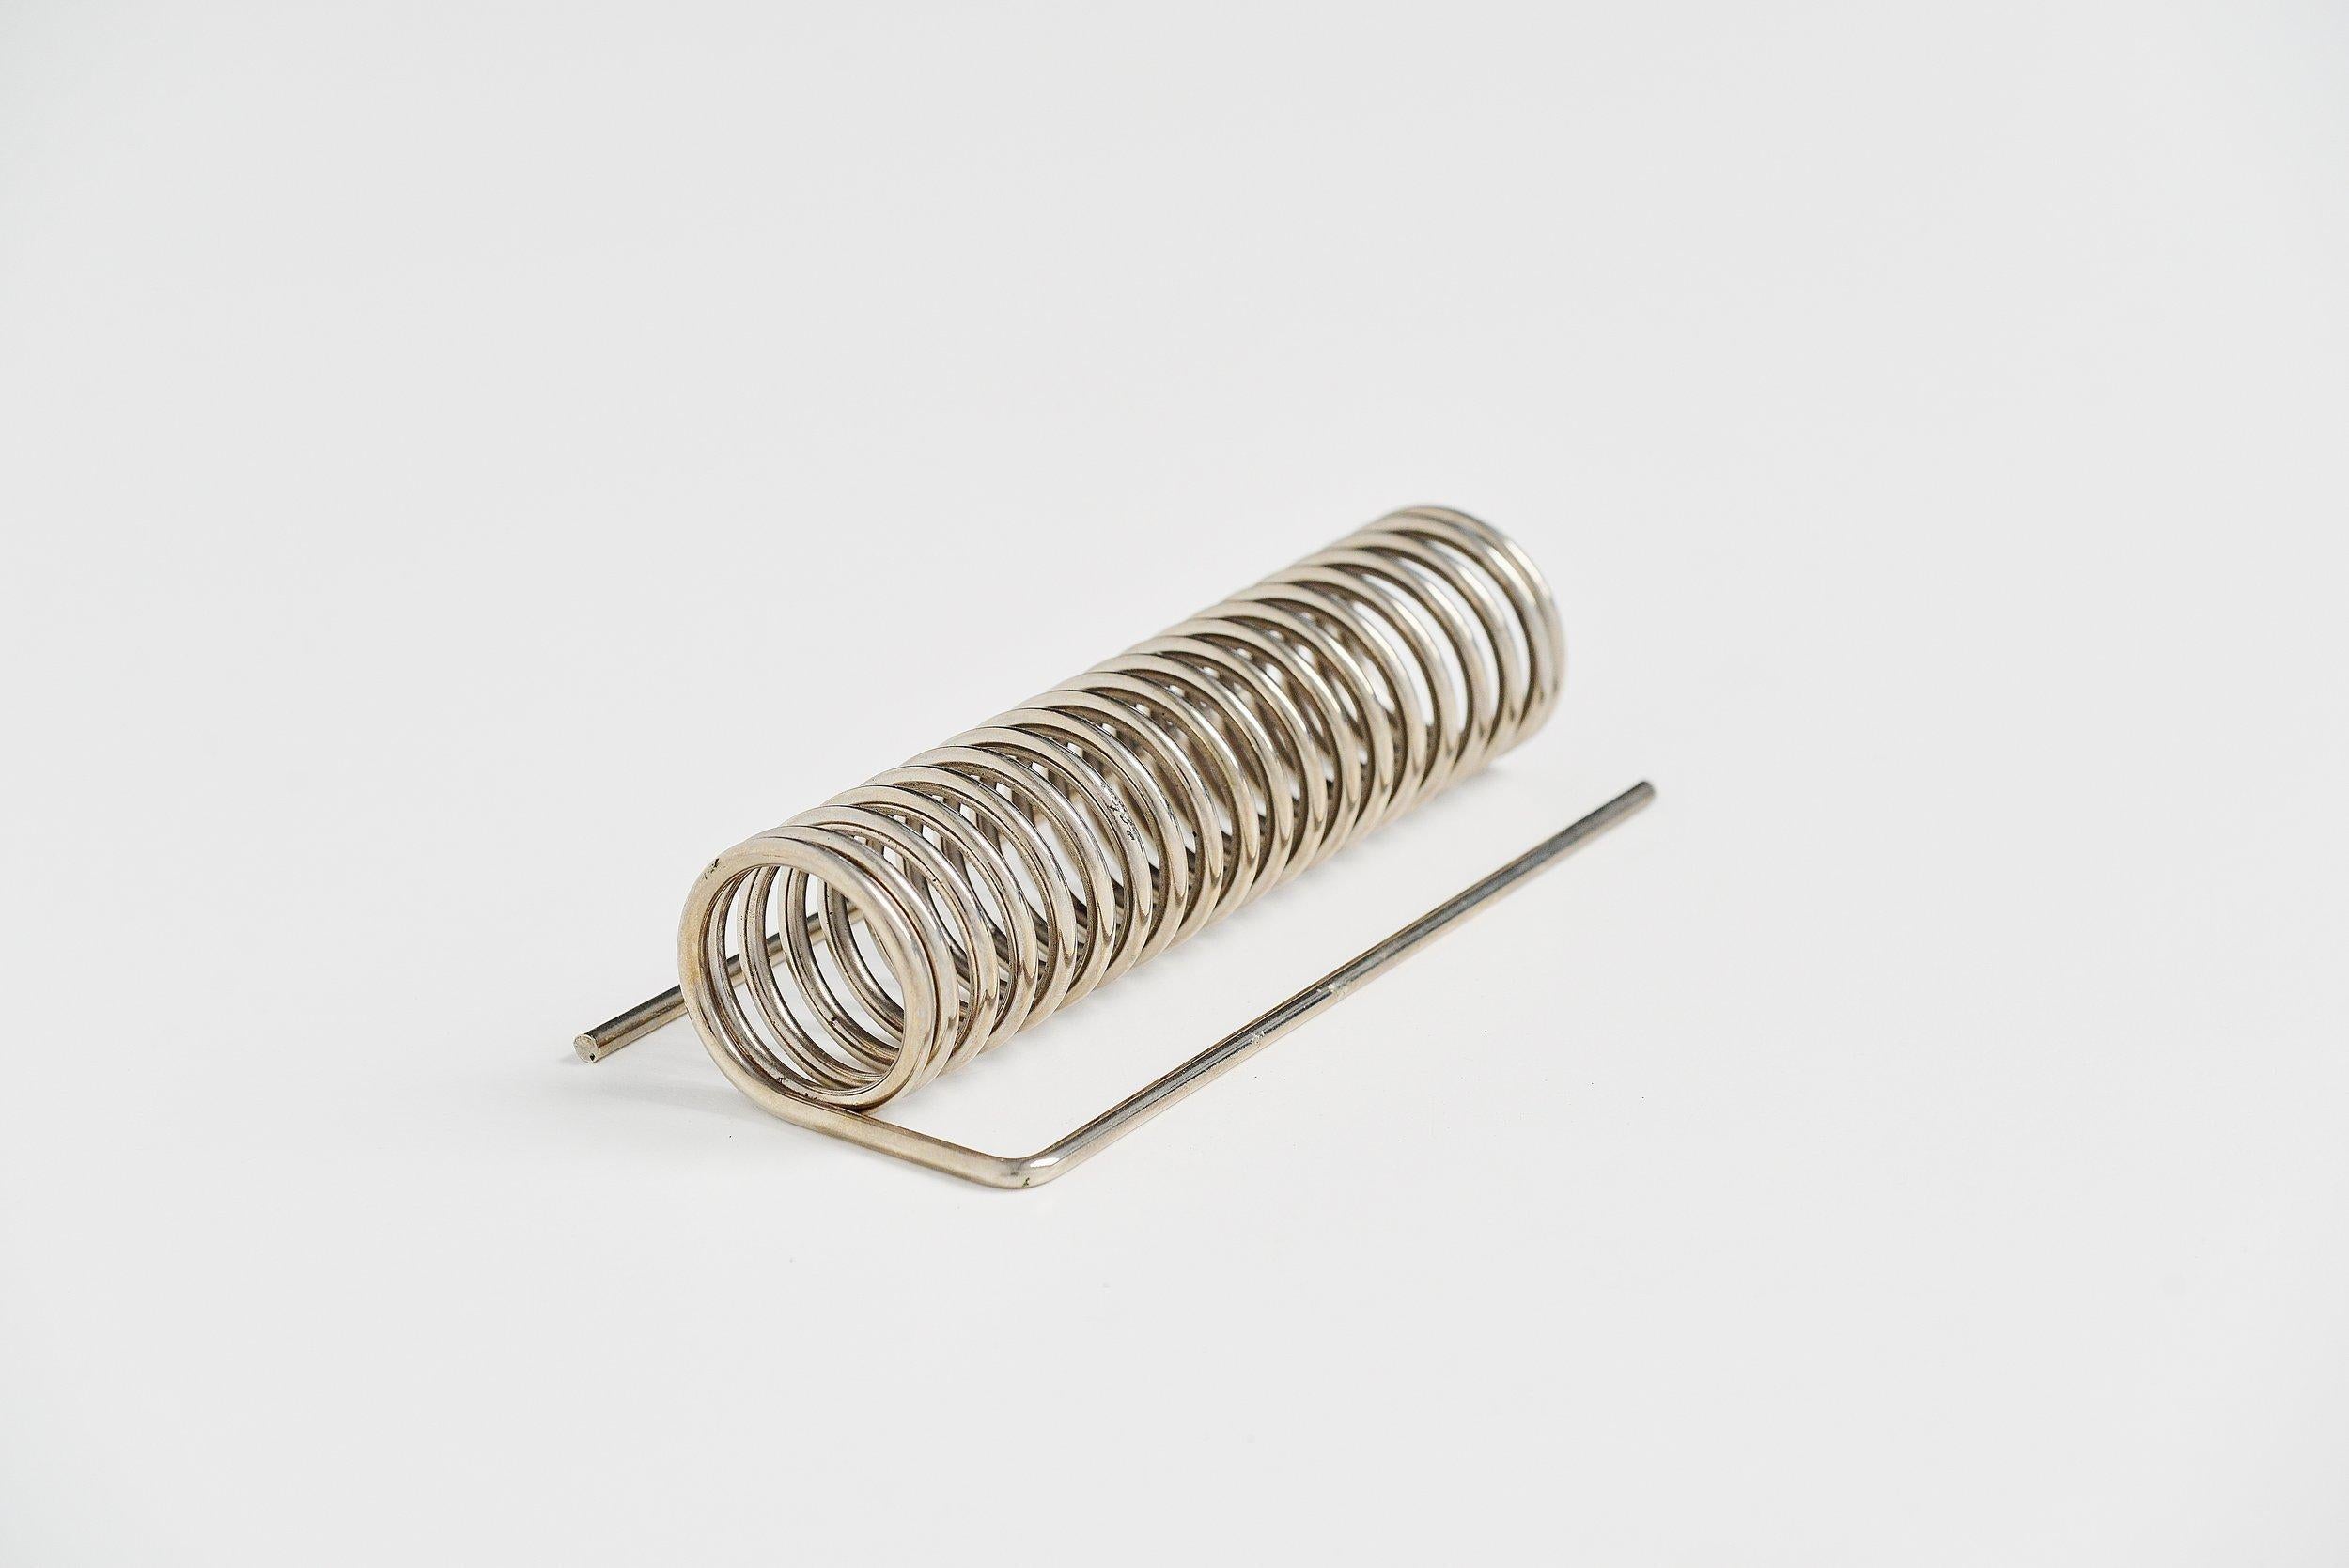 Rare limited edition letter holder designed by Yonel Lebovici and manufactured by Distrimex, France 1969. This nickel plated spiral shaped letter holder was made in a limited production of only 500 pieces. Rare and collectors item, very nice and